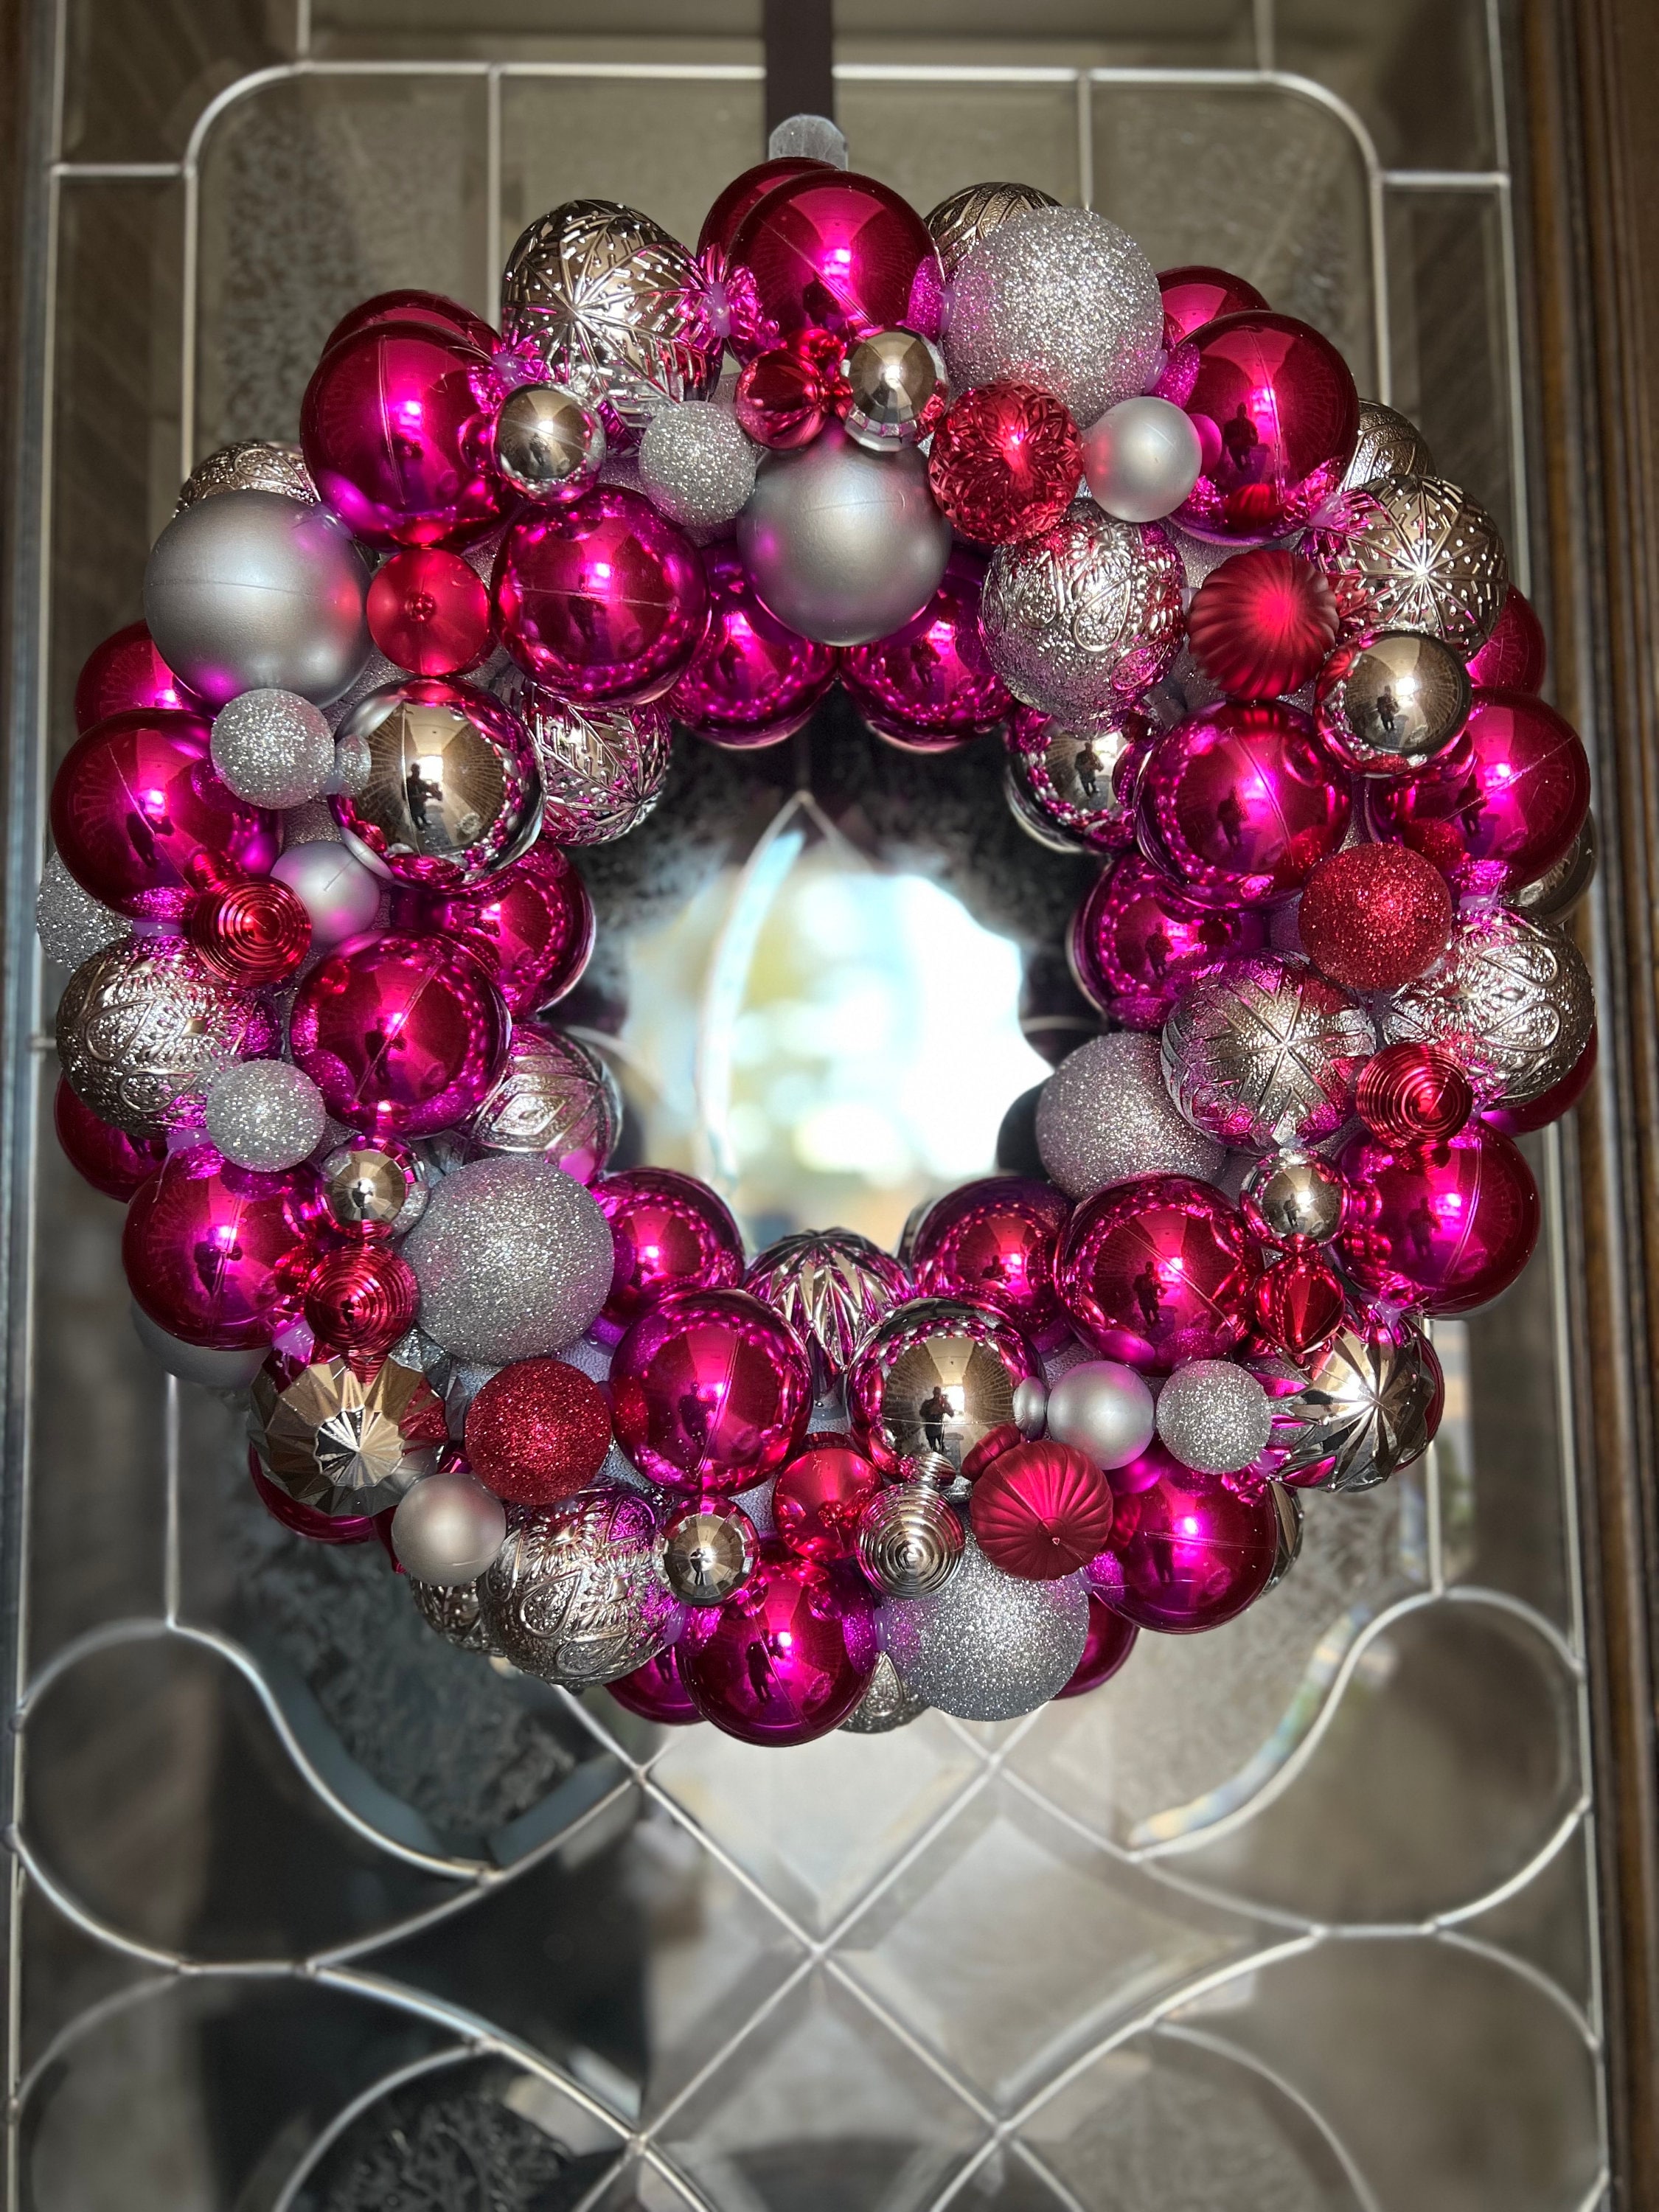 Wreath Of Small Red, Pink And Purple Christmas Tree Balls On